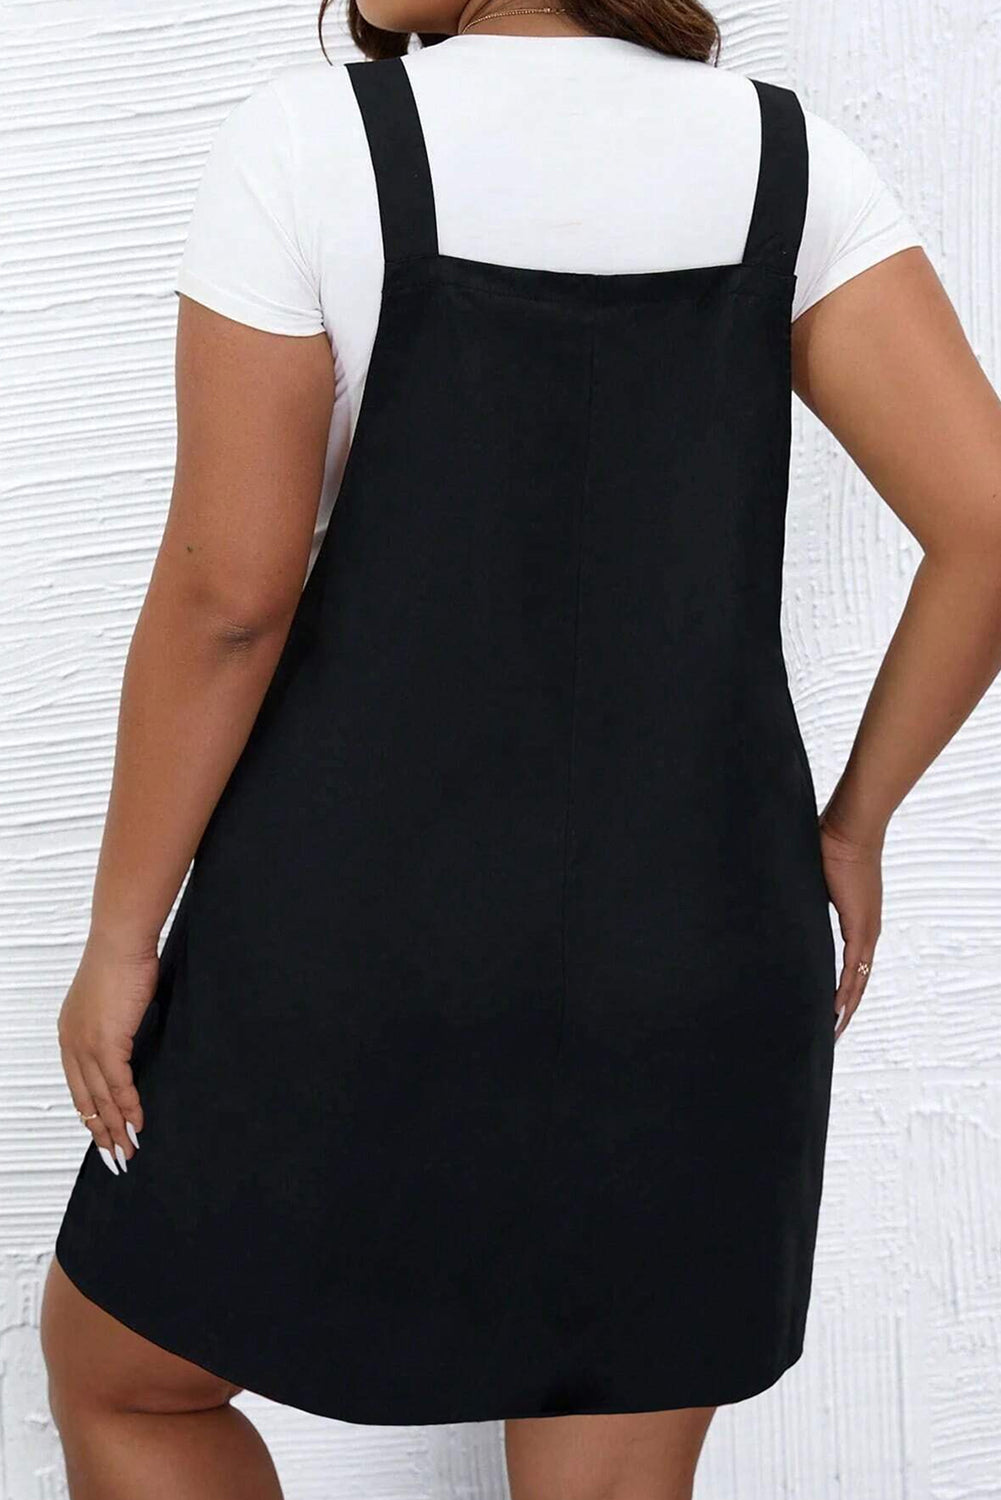 Black Plus Size Overall Dress with Buttoned Straps